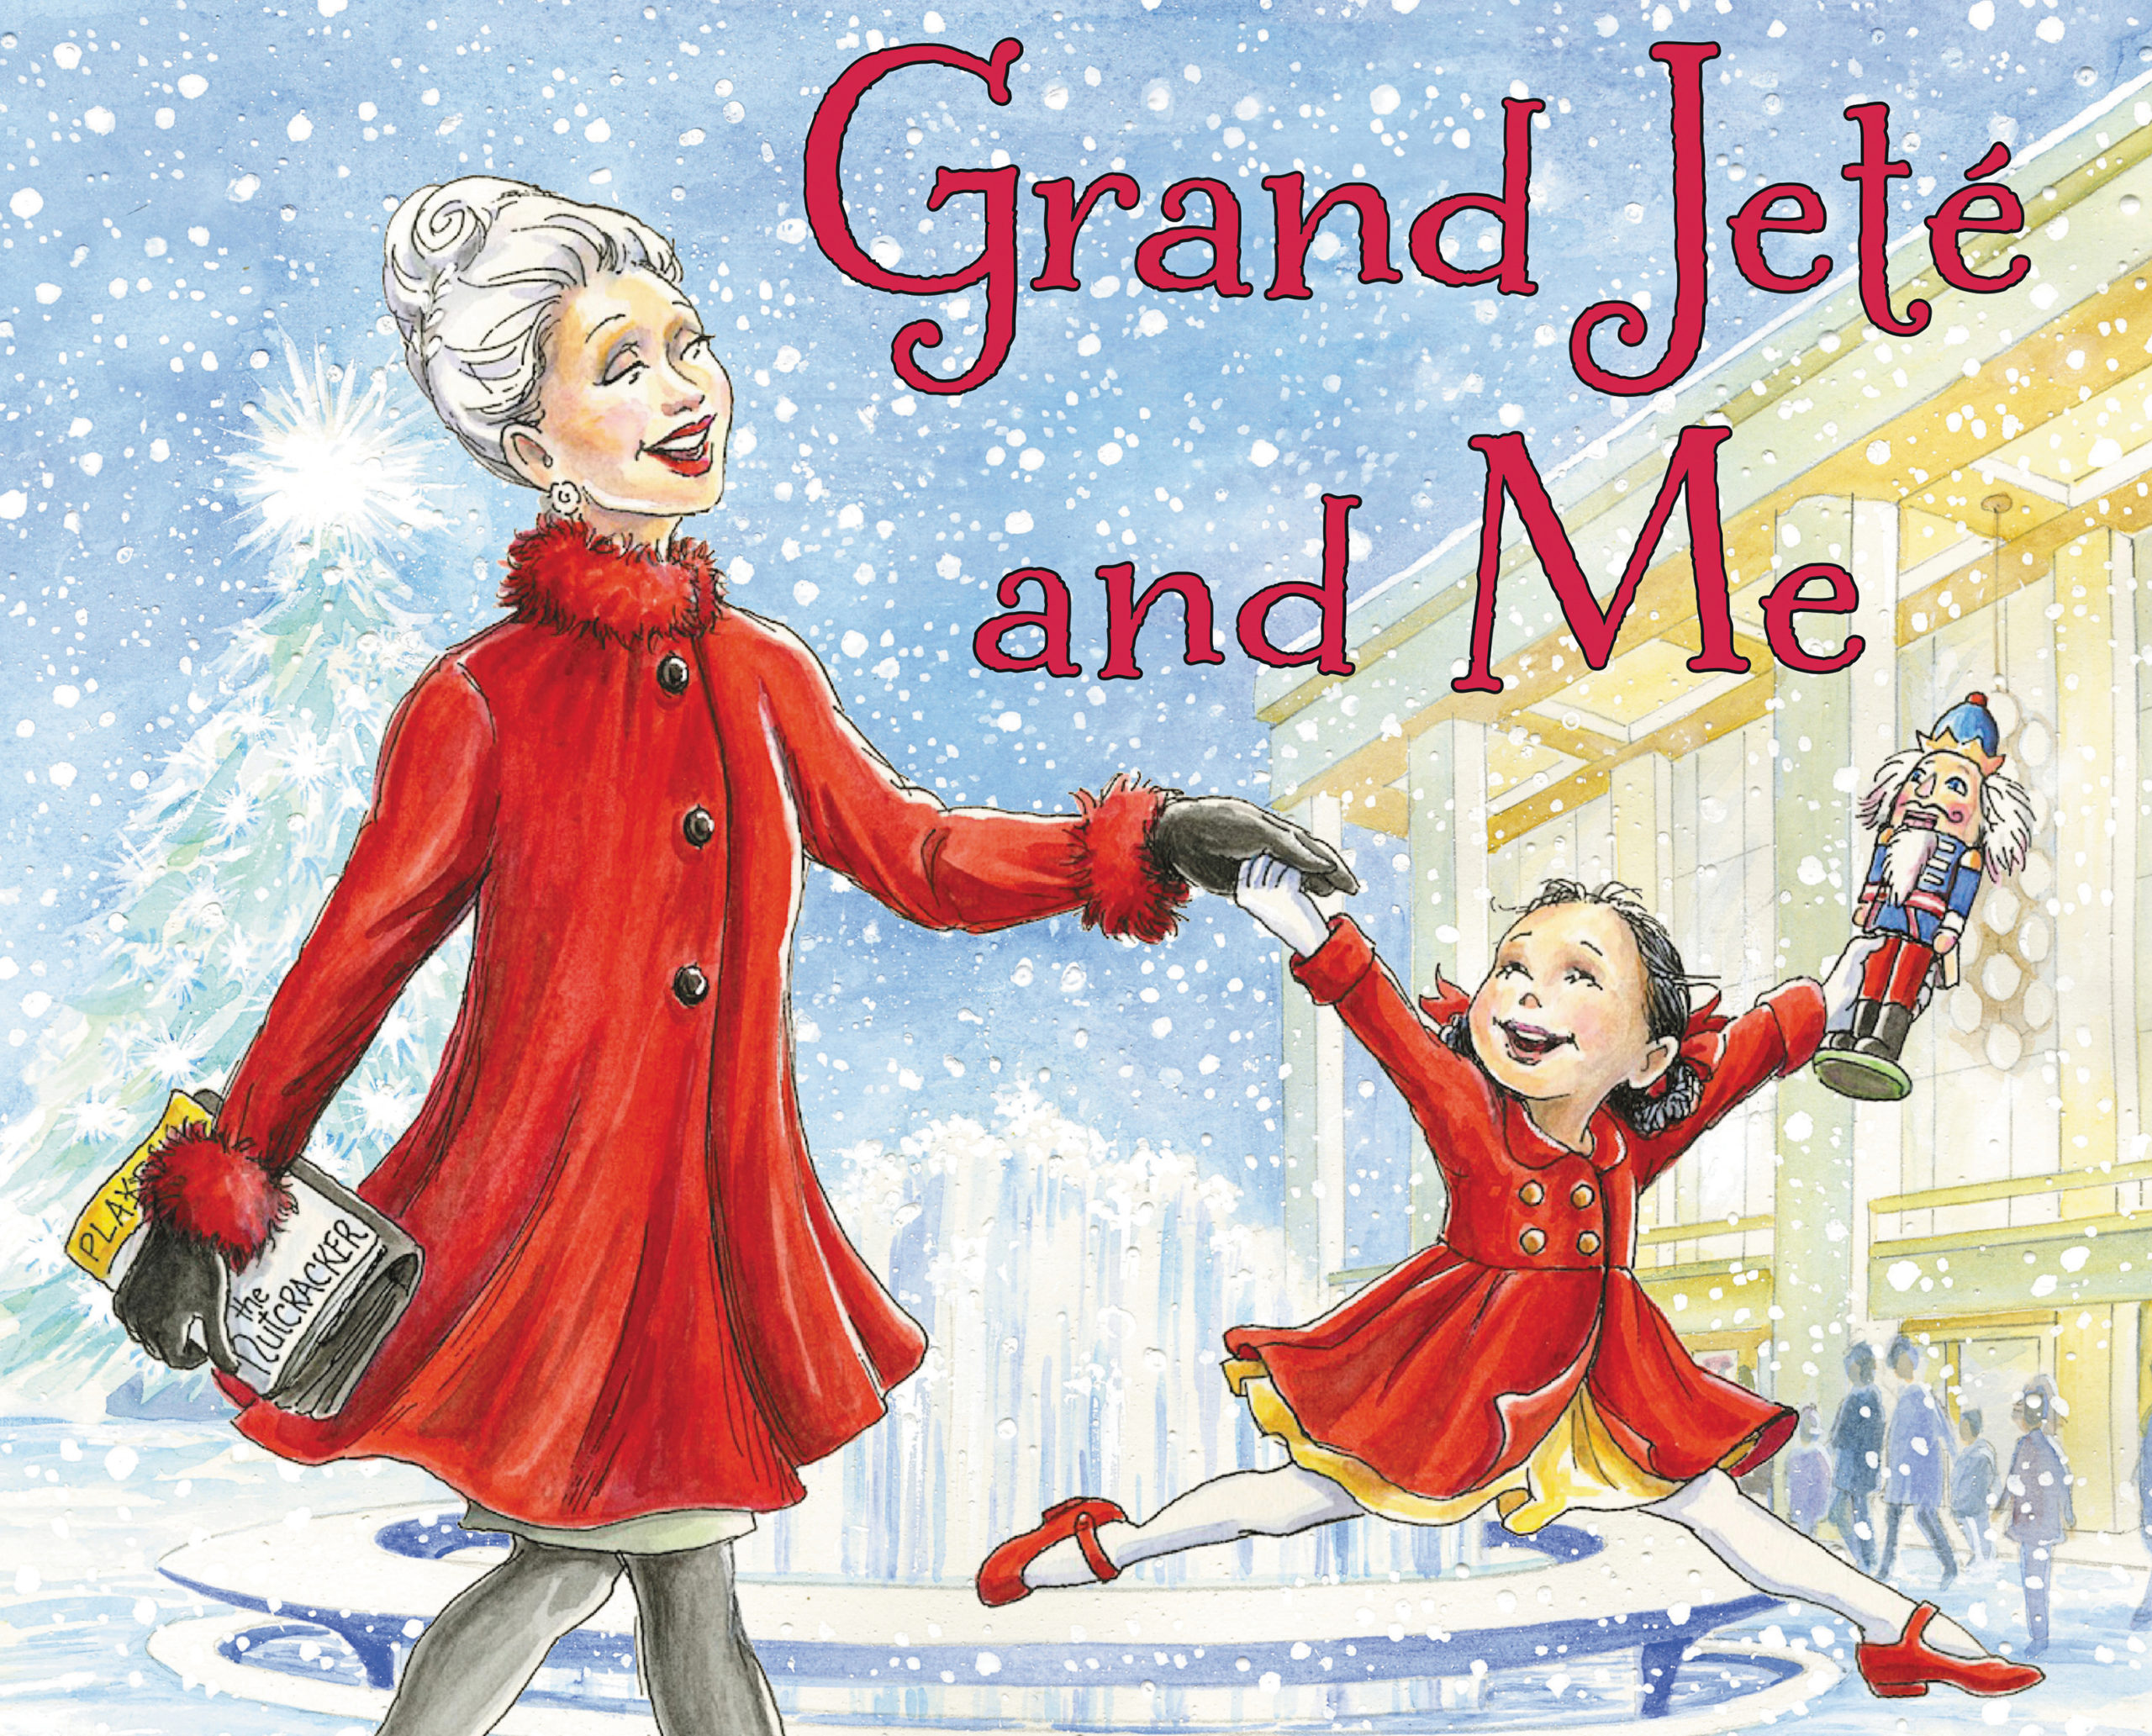 The image shows a book cover, showing an illustration of a glamorous grandmother in a red coat and boots holding teh hand of her grandchild, who performs a grand jeté outside a theater while holding a nutcracker doll. She wears a red dress, white tights and shoes. The title "Grand Jeté and Me" is shown in the upper right corner.